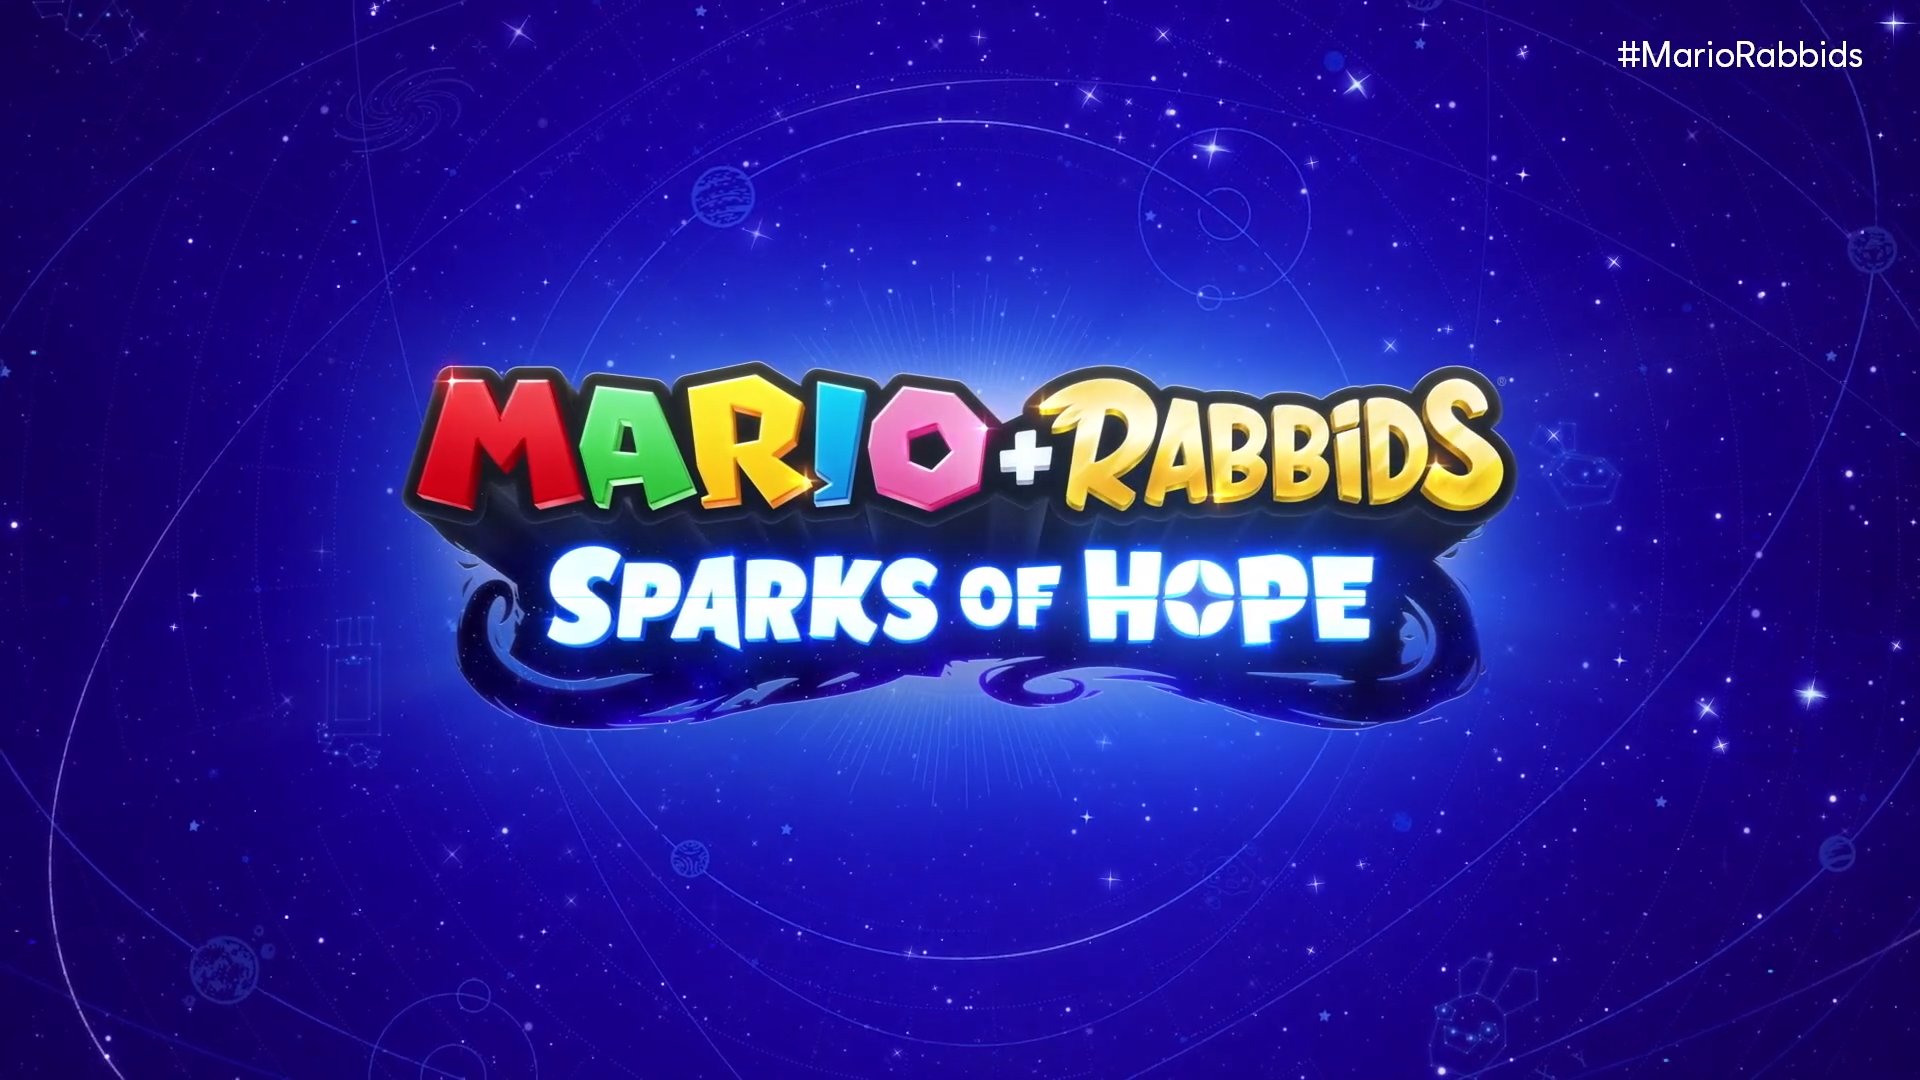 Mario + Rabbids Sparks of Hope heads into space